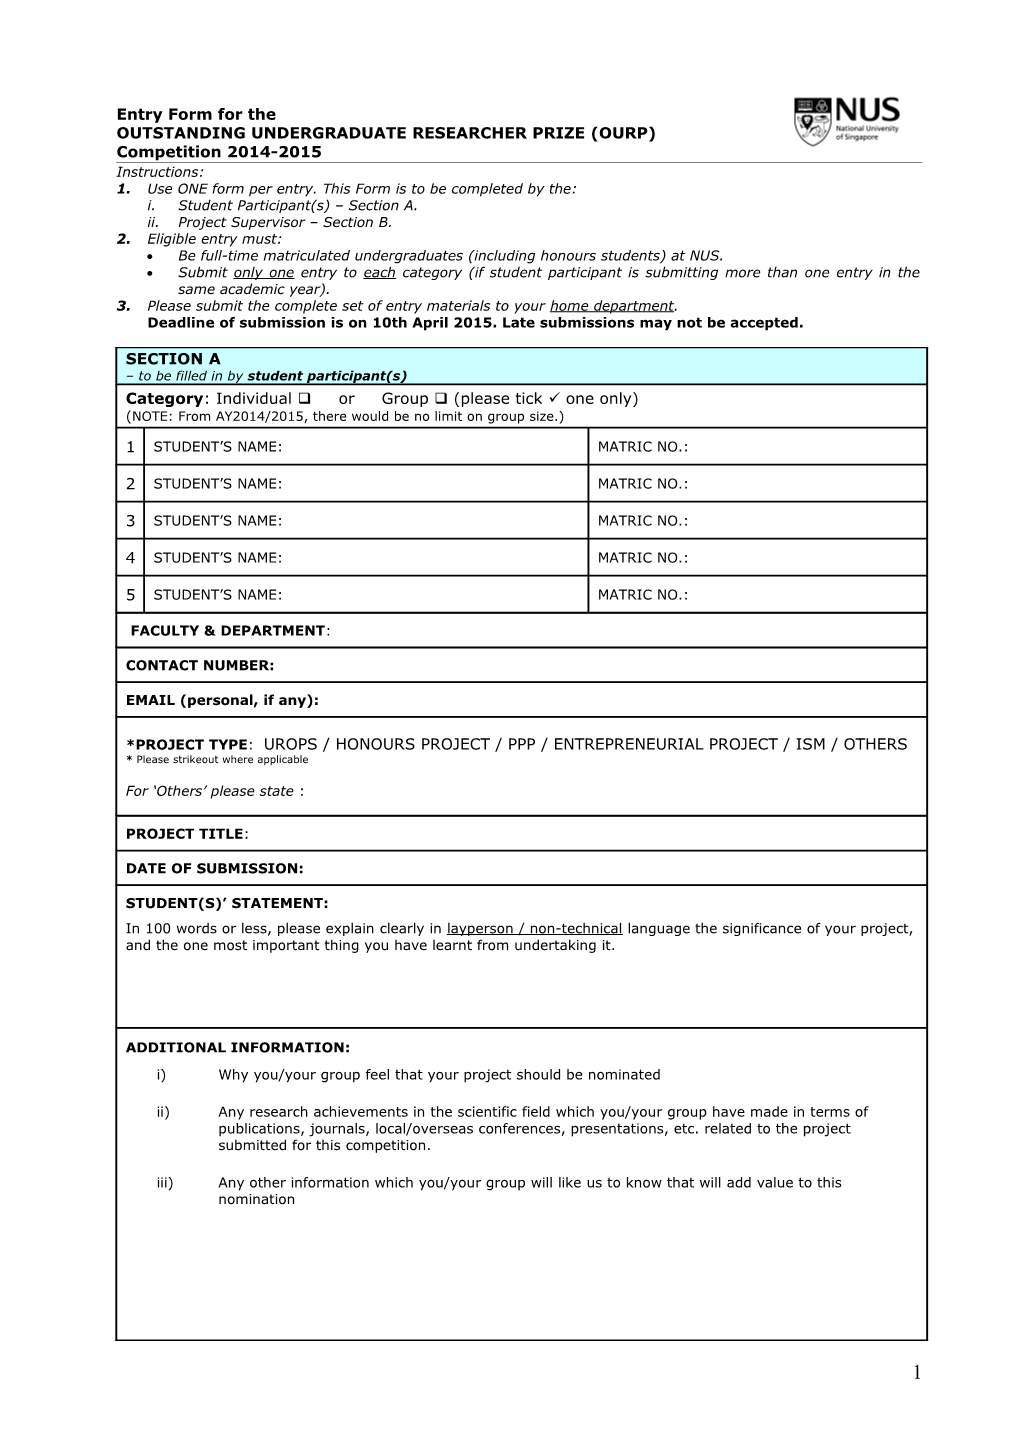 OURP Entry Form